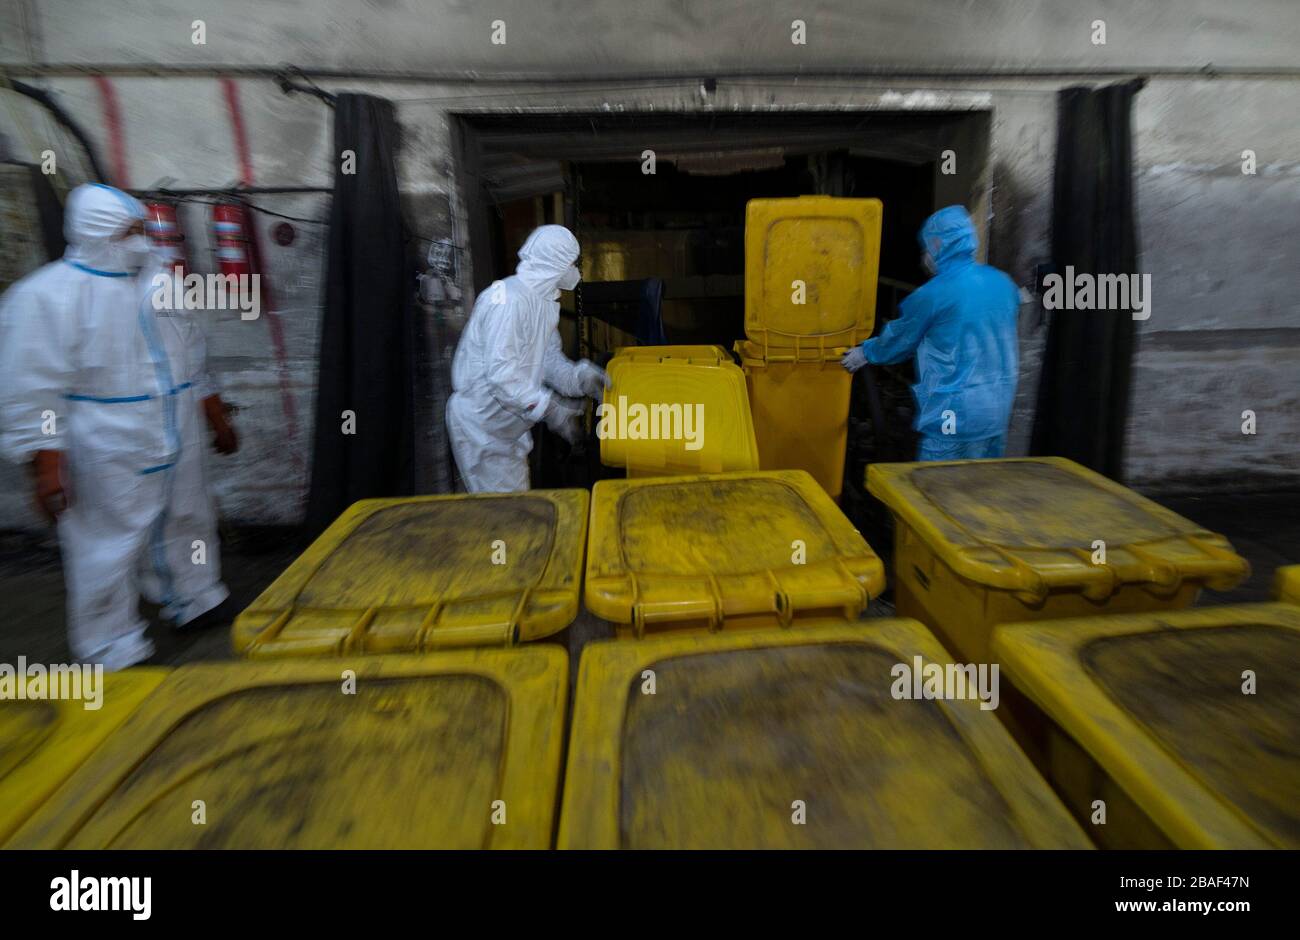 (200327) -- WUHAN, March 27, 2020 (Xinhua) -- Wang Peng (C) and his colleagues work at a medical waste treatment company in Wuhan, central China's Hubei Province, March 26, 2020. Wang Peng, 35, has been working for the Wuhan Hanshi Environmental Engineering Company for 9 years, where he is responsible for the disposal and incineration of medical waste.Protection against infection is a major challenge that Wang and his coworkers face, as they work 12-hour shifts to cope with the surging workload during the COVID-19 outbreak. 'I like what I'm doing,' Wang said, 'I'm not only making money for my Stock Photo